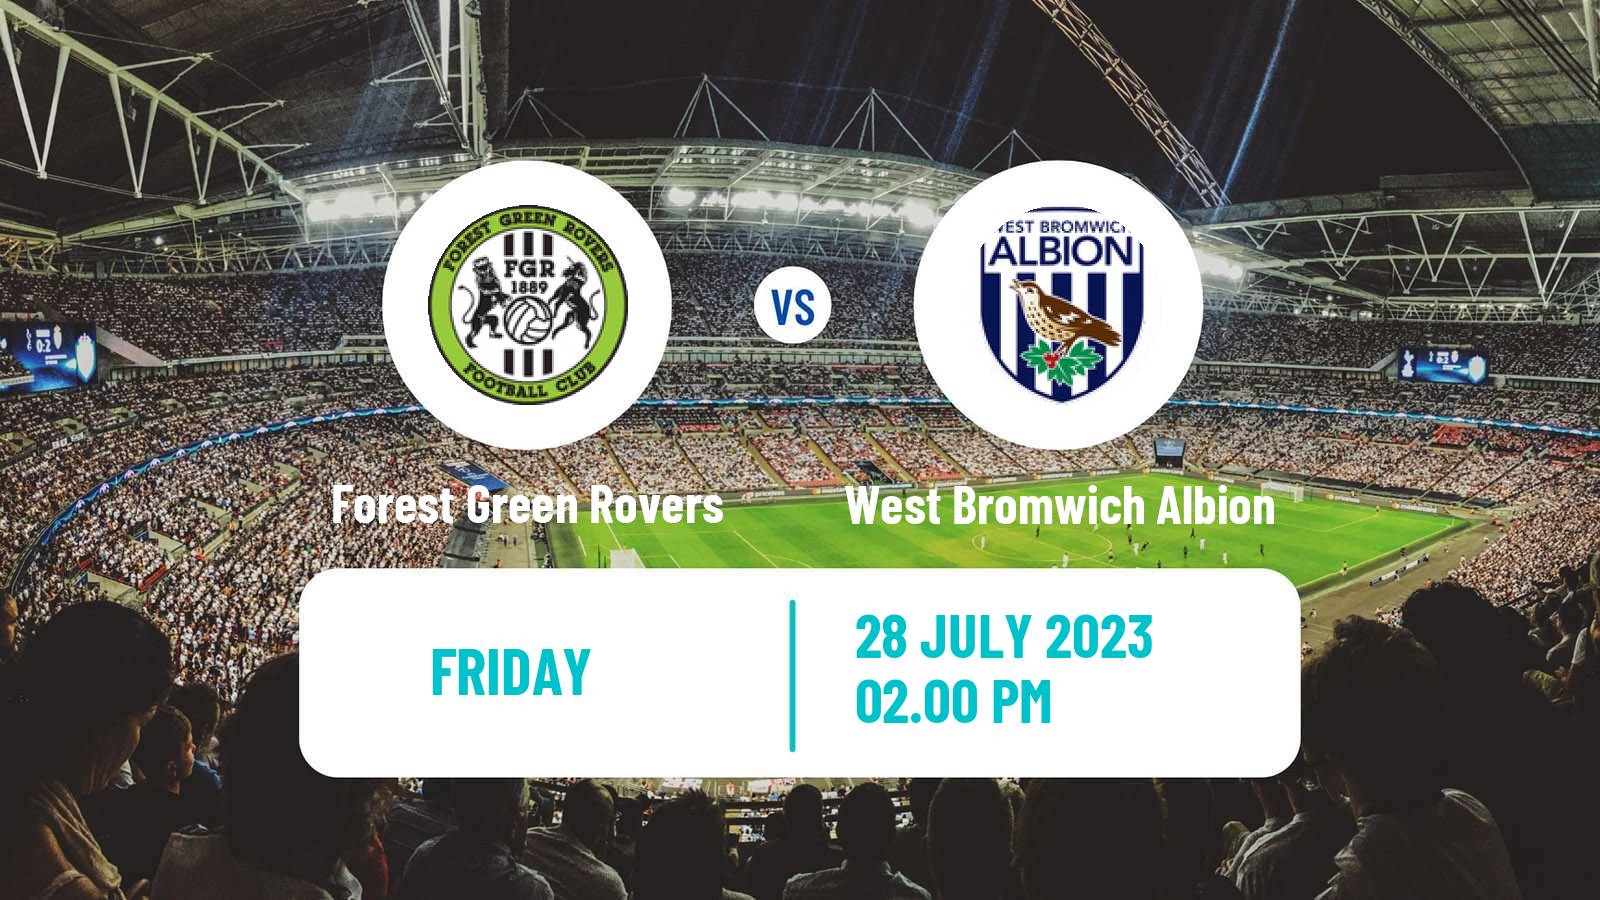 Soccer Club Friendly Forest Green Rovers - West Bromwich Albion